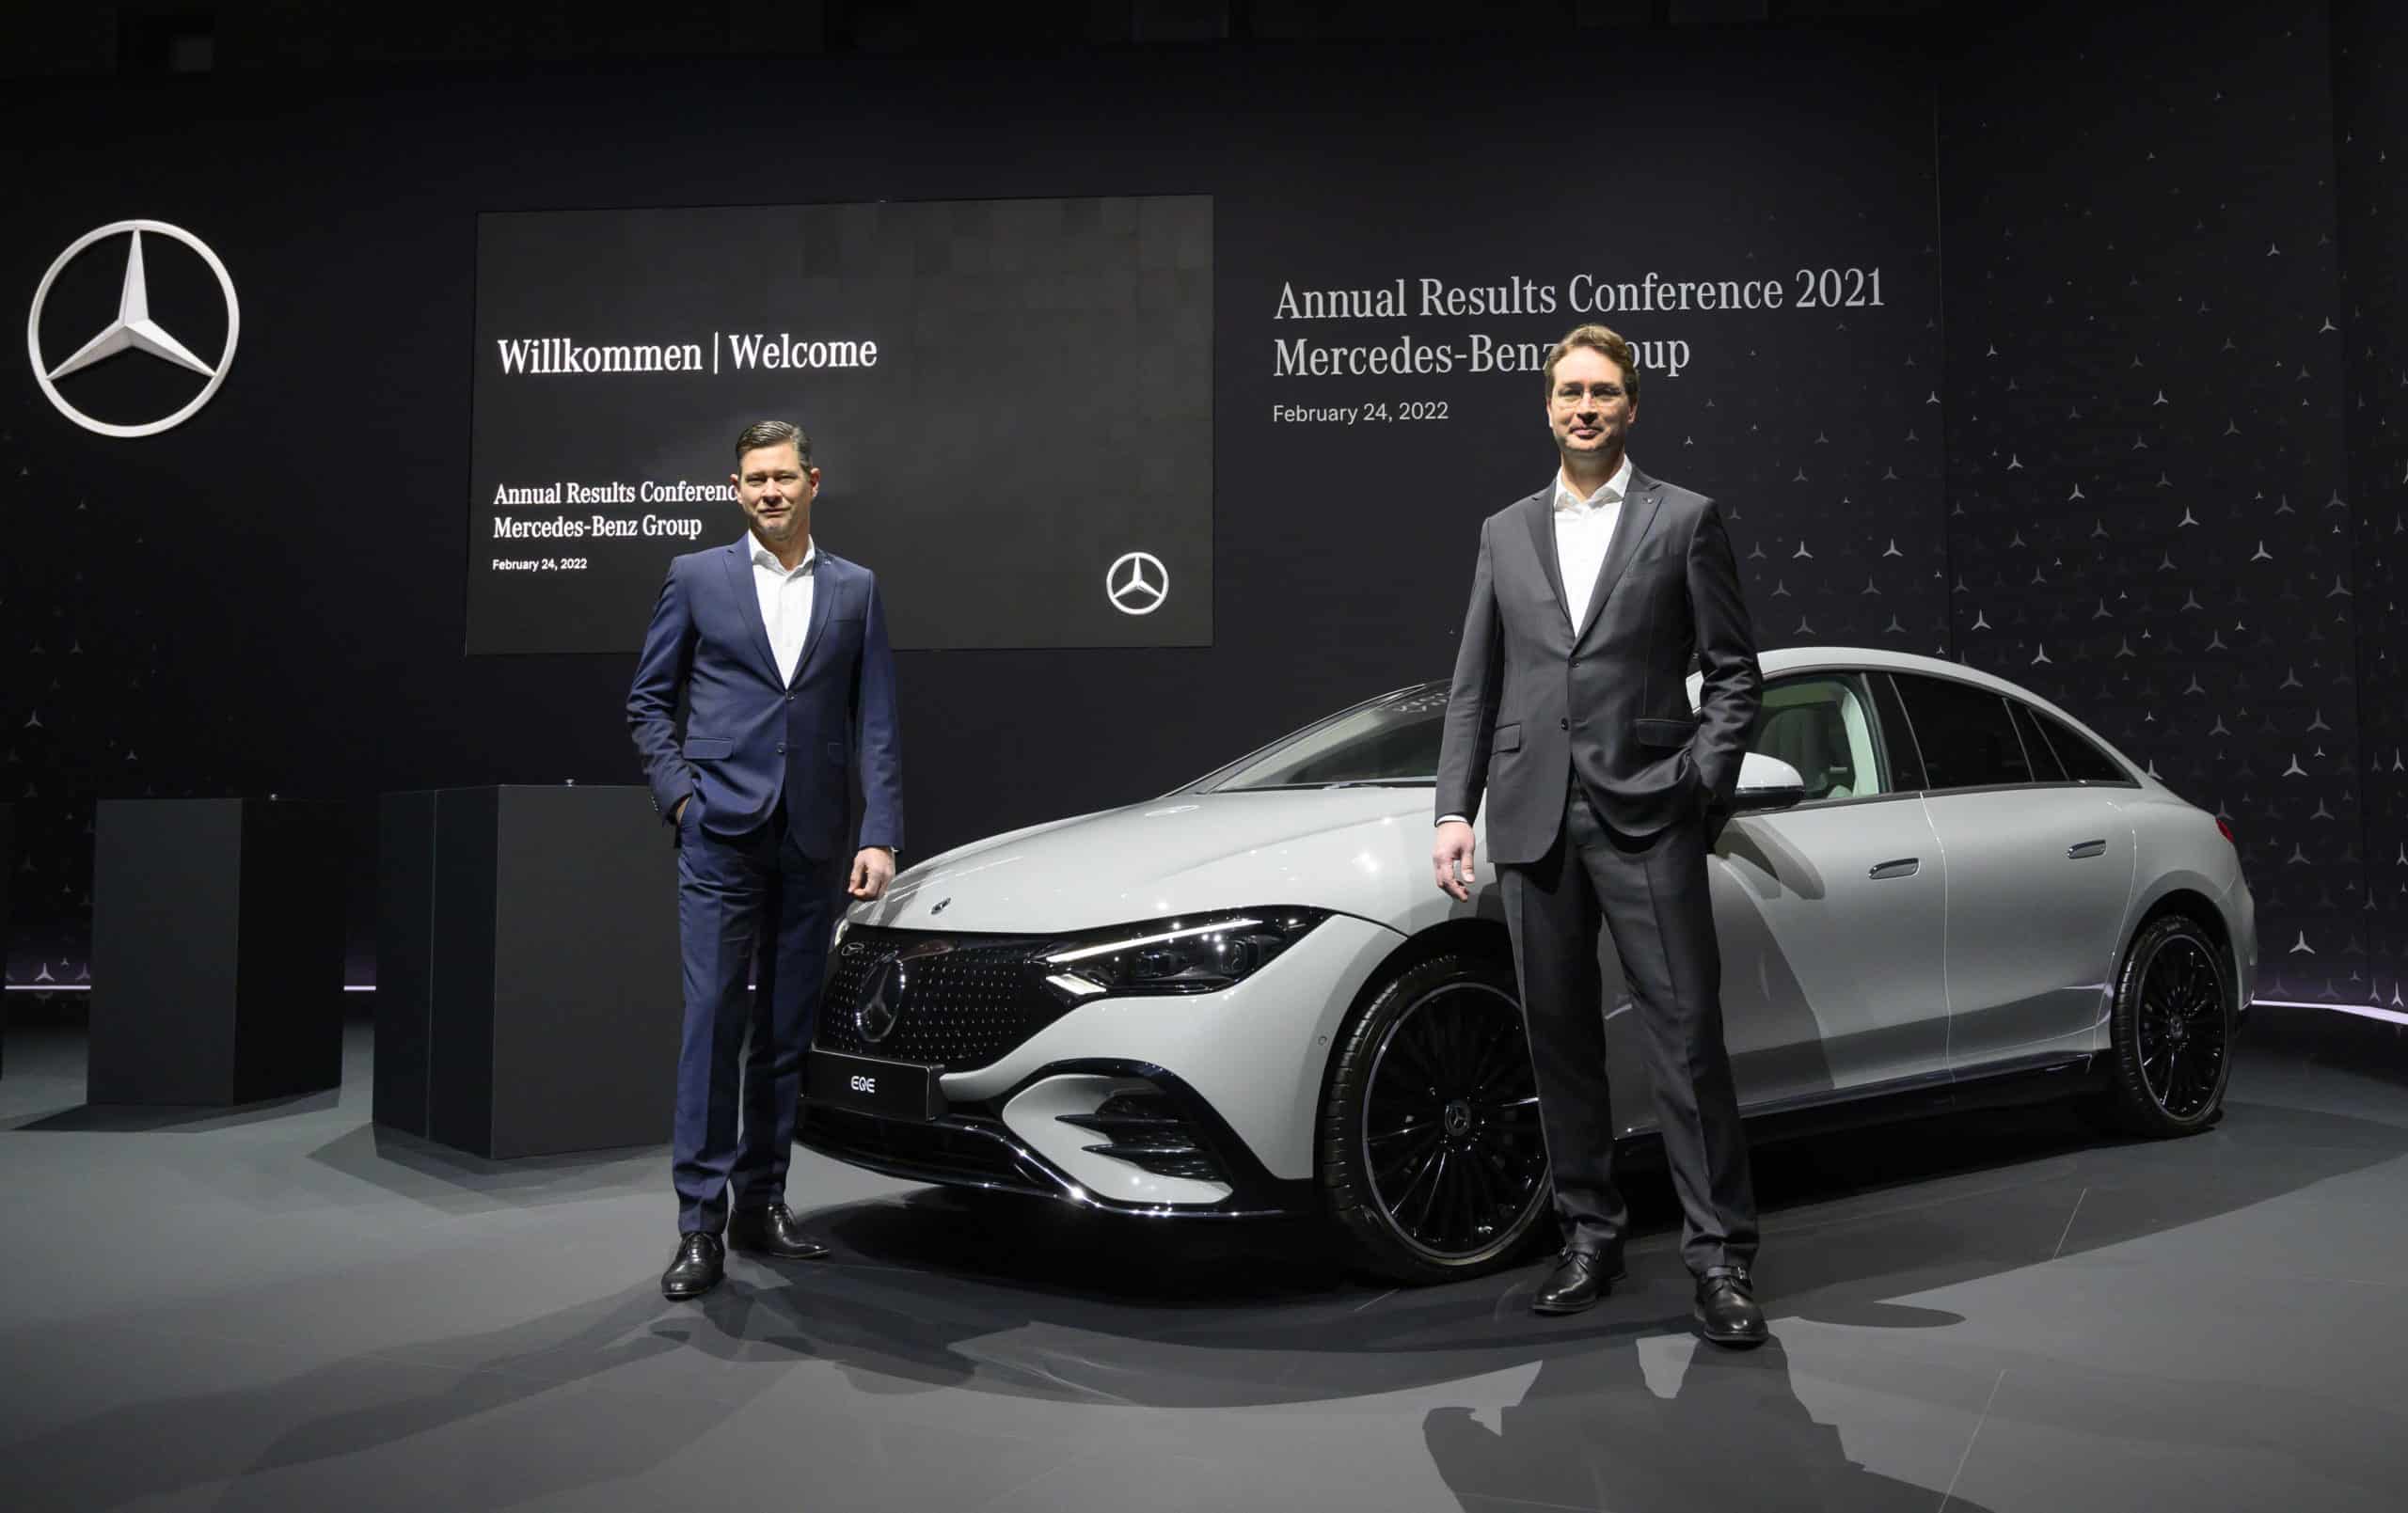 Mercedes-Benz Group AG – Annual Results Conference 2021, (v.l.n.r.) Harald Wilhelm und Ola Källenius